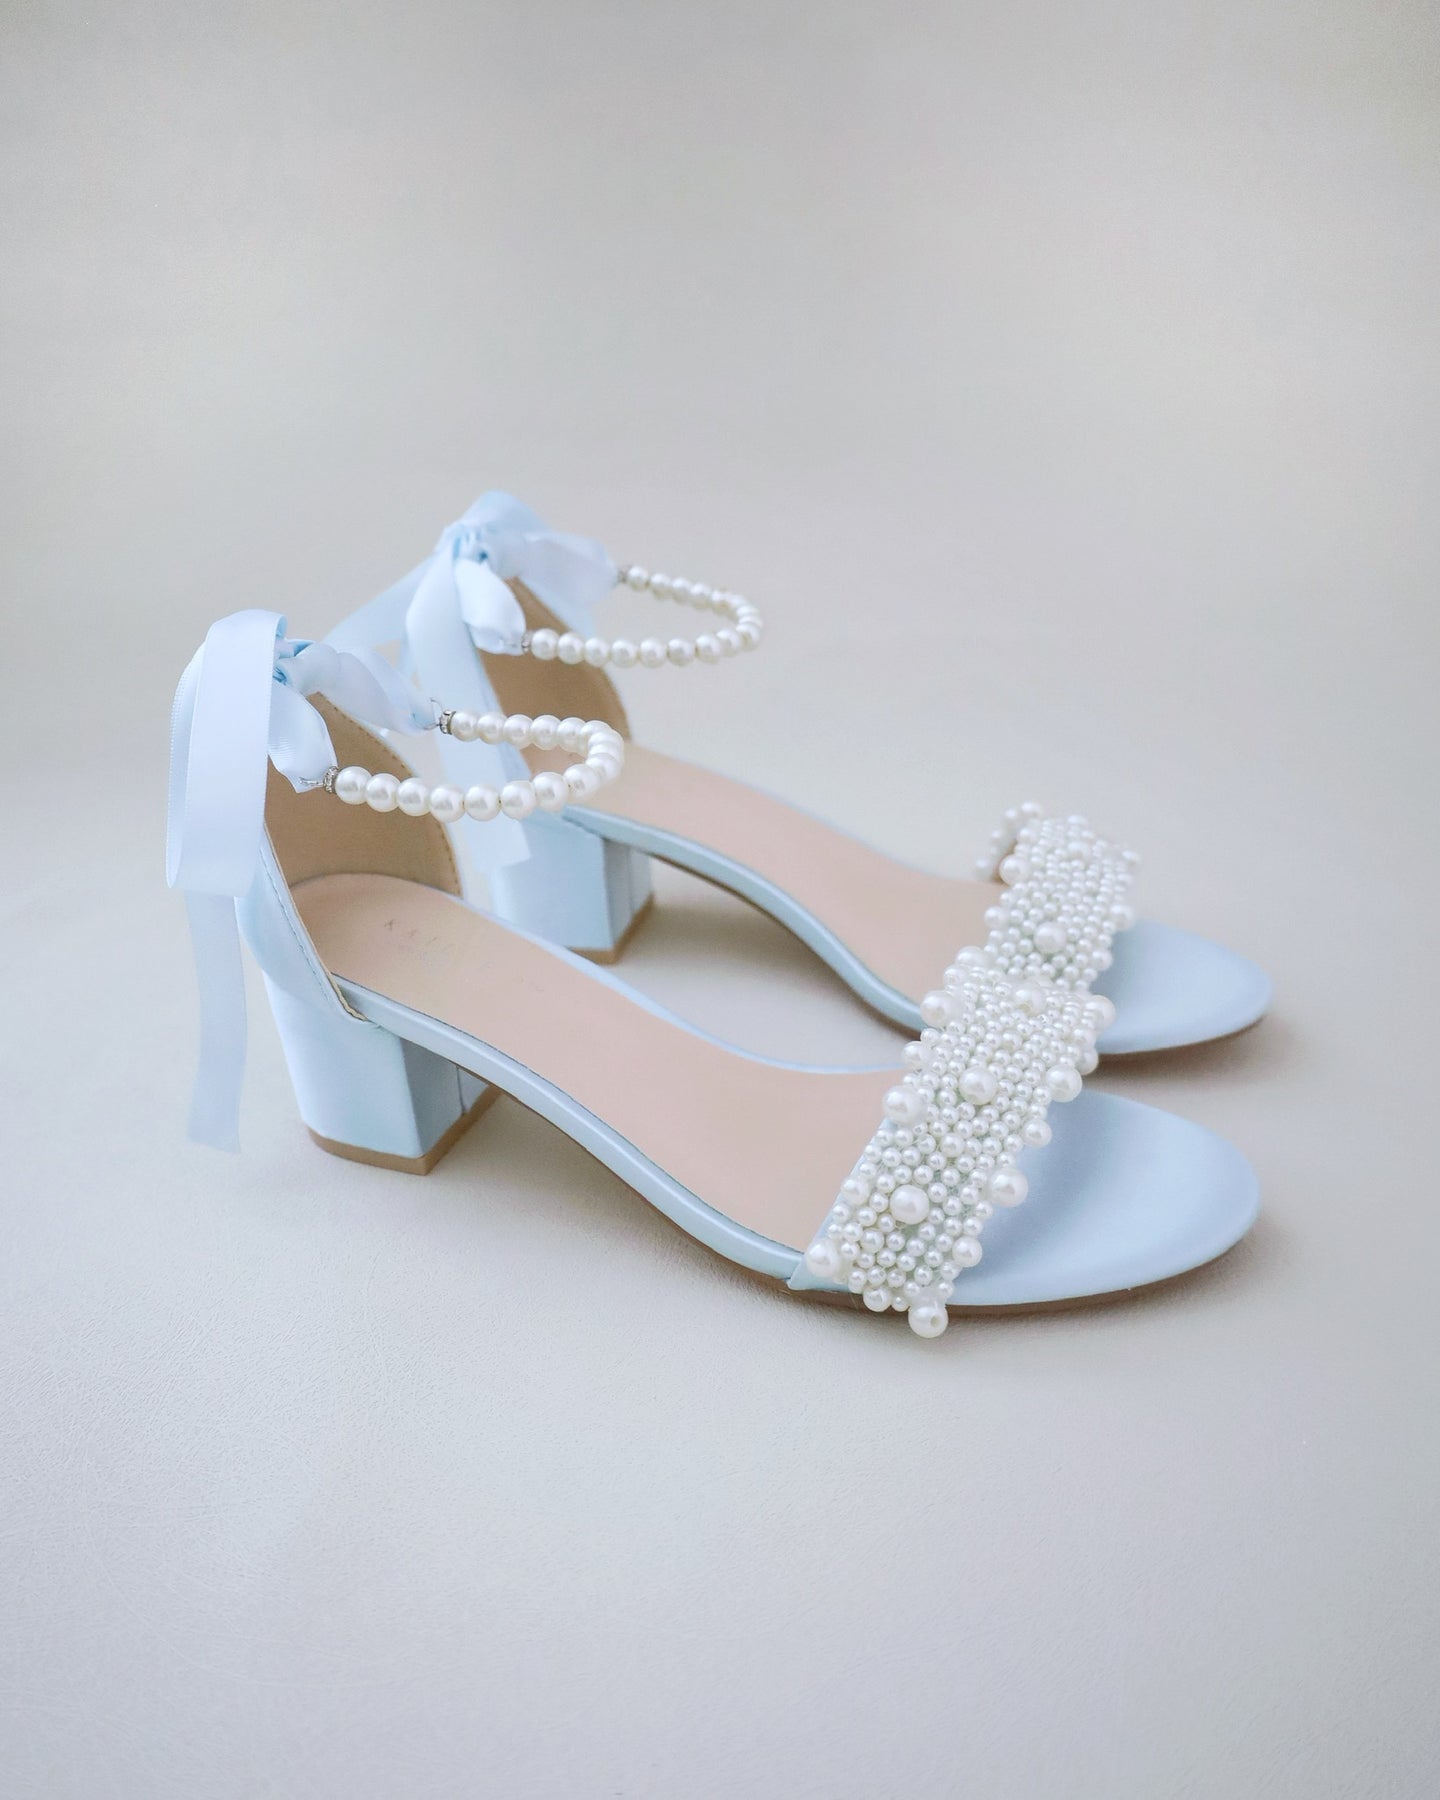 Wedding Concept with Silver Shoes. High Heels Wedding Shoes. Stock Image -  Image of celebration, isolated: 60821271